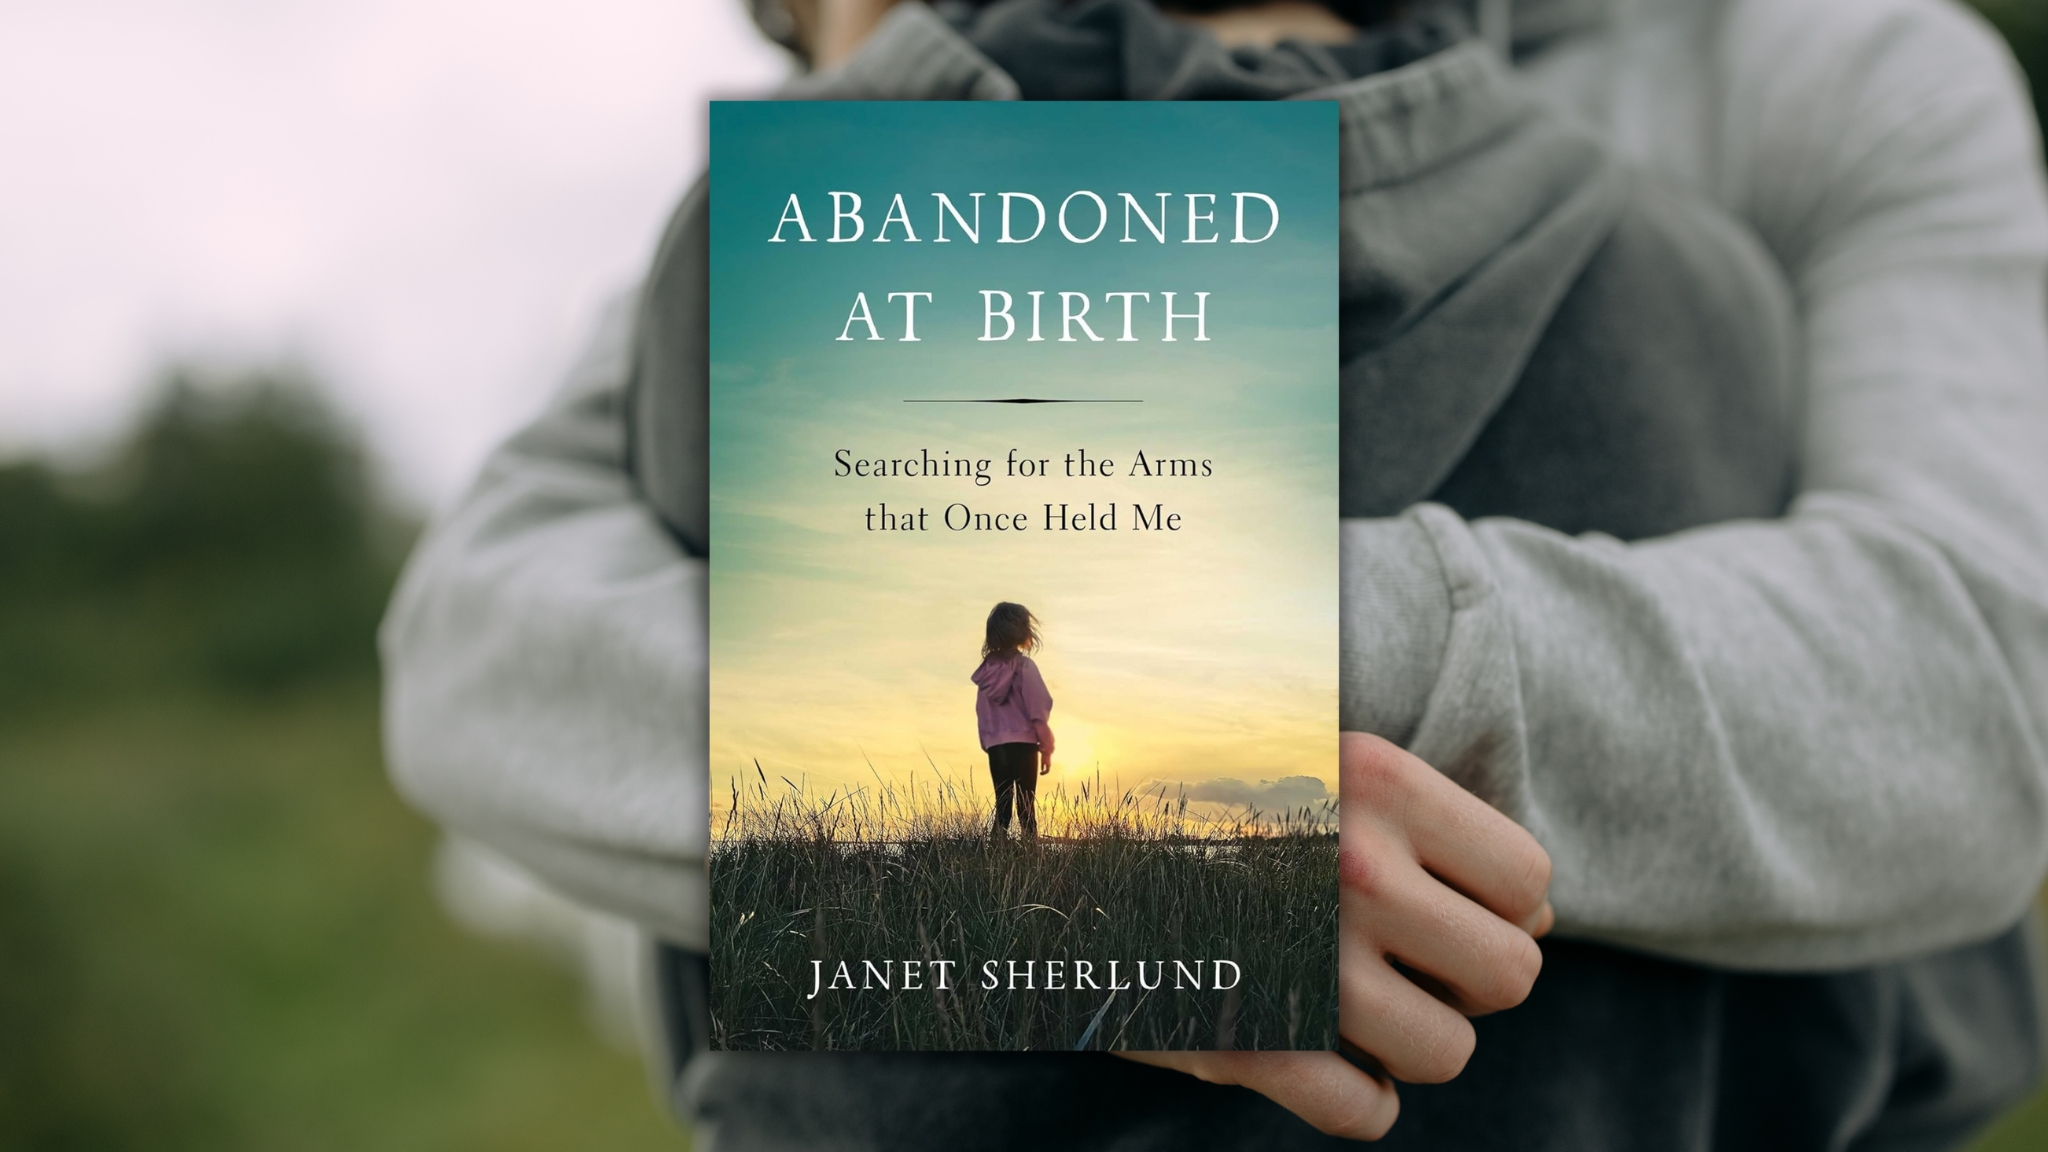 Abandoned at Birth by Janet Sherlund